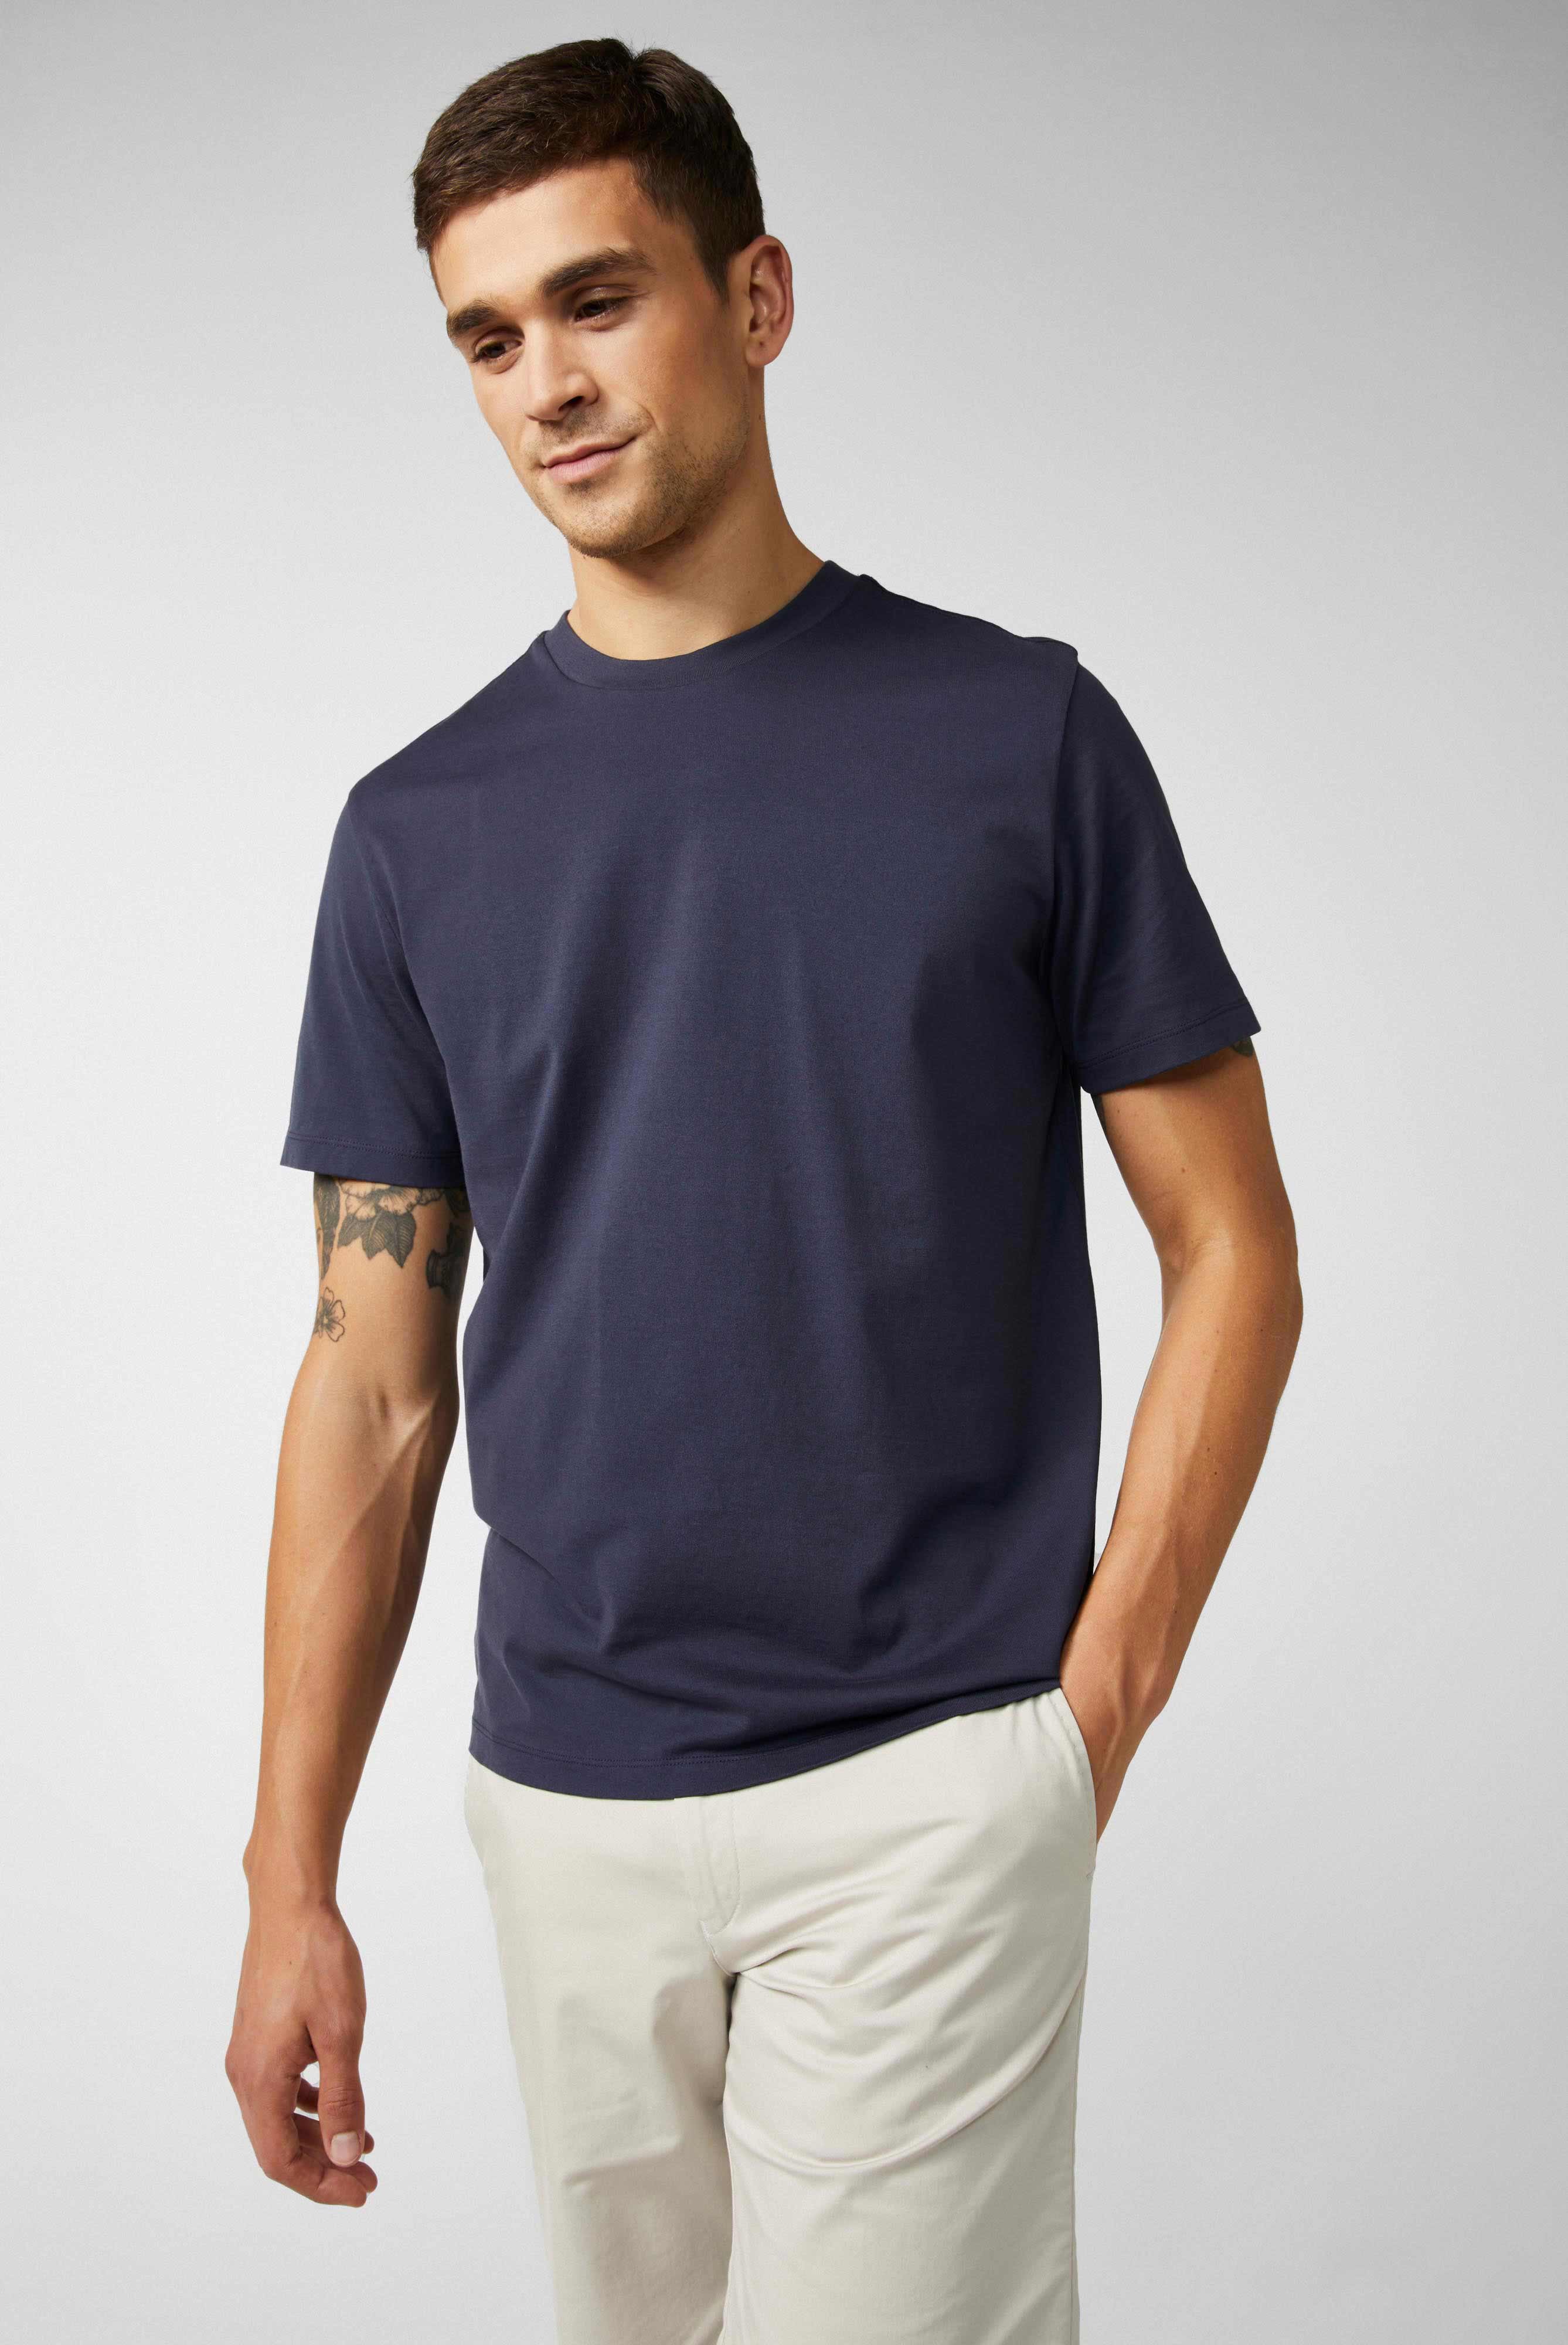 T-Shirts+Relaxed Fit Crew Neck Jersey T-Shirt+20.1660..Z20044.790.XXL